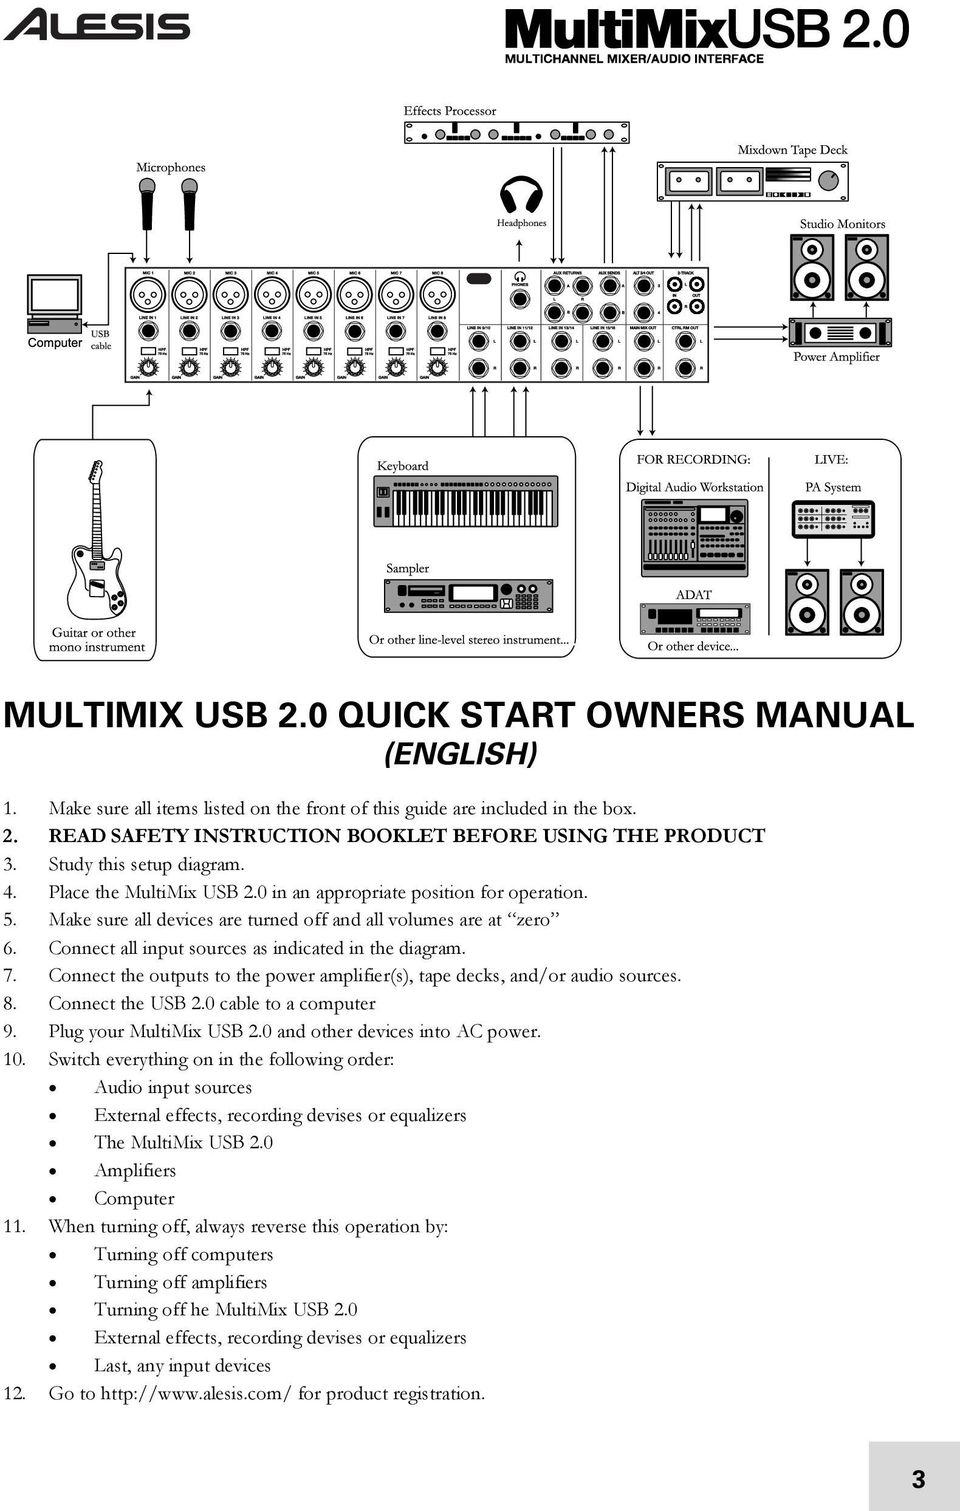 Connect all input sources as indicated in the diagram. 7. Connect the outputs to the power amplifier(s), tape decks, and/or audio sources. 8. Connect the USB 2.0 cable to a computer 9.